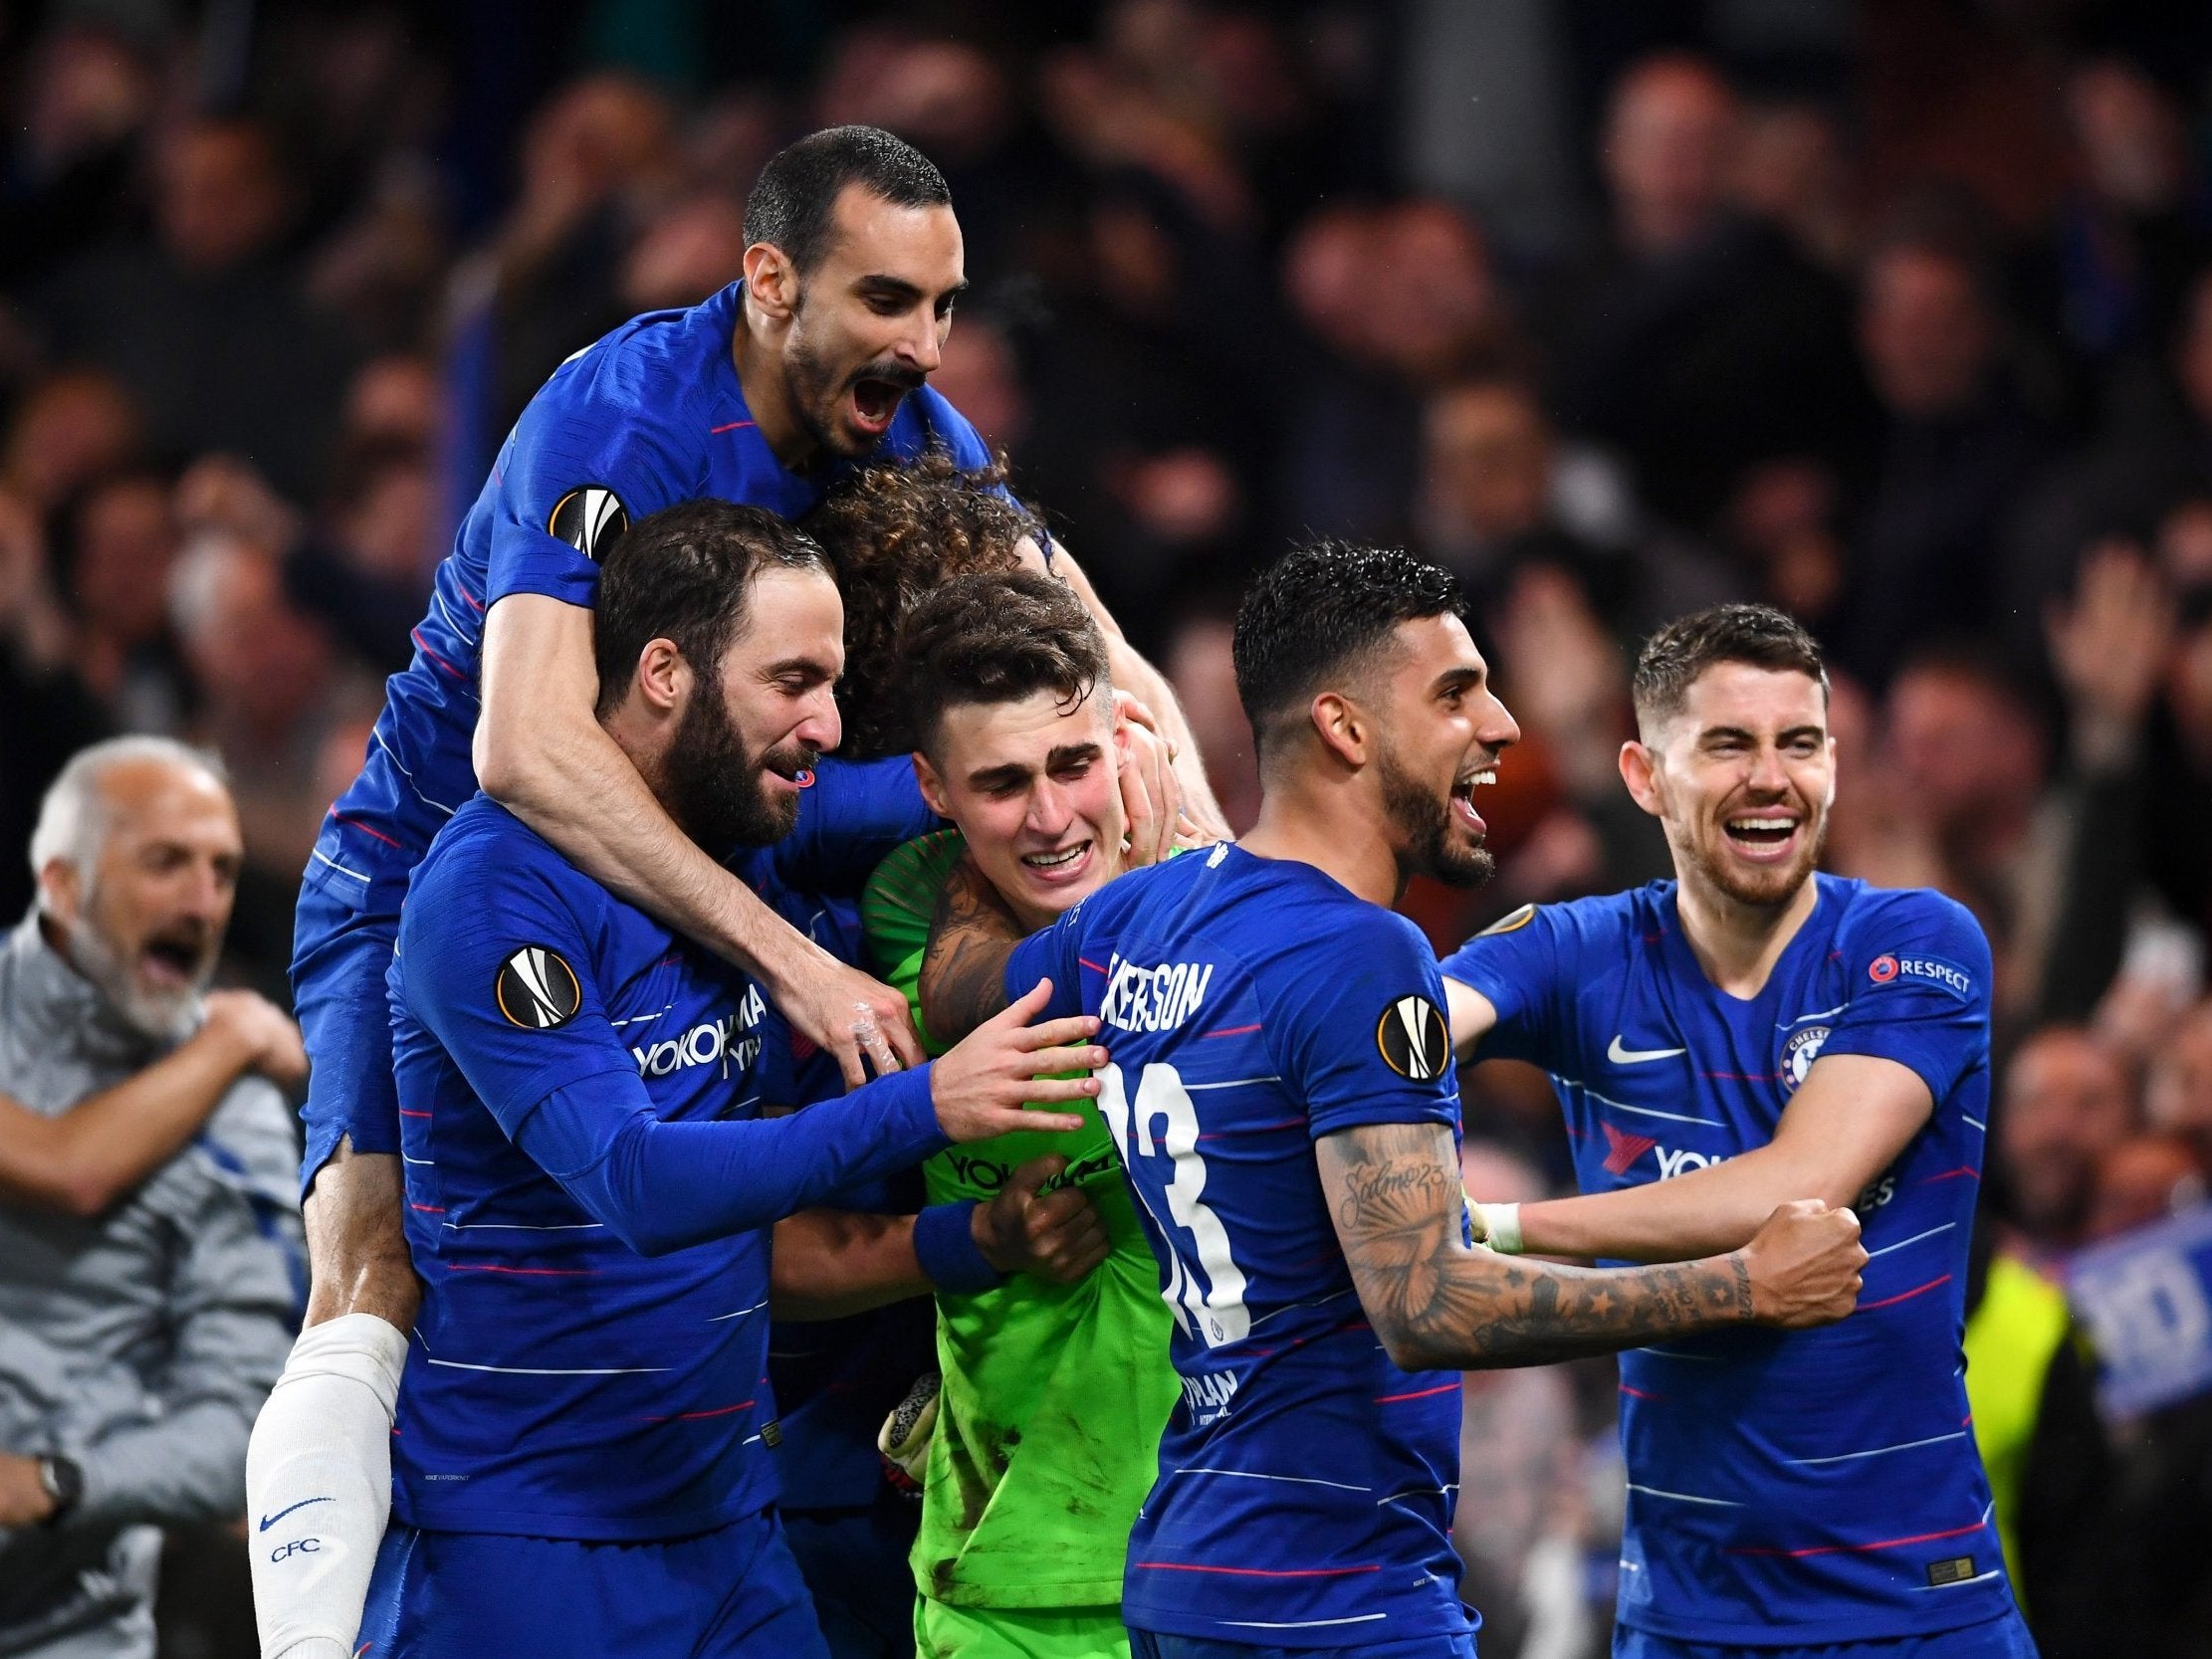 Chelsea vs Frankfurt result: Eden Hazard clinches victory on penalties to set up Europa League final vs Arsenal